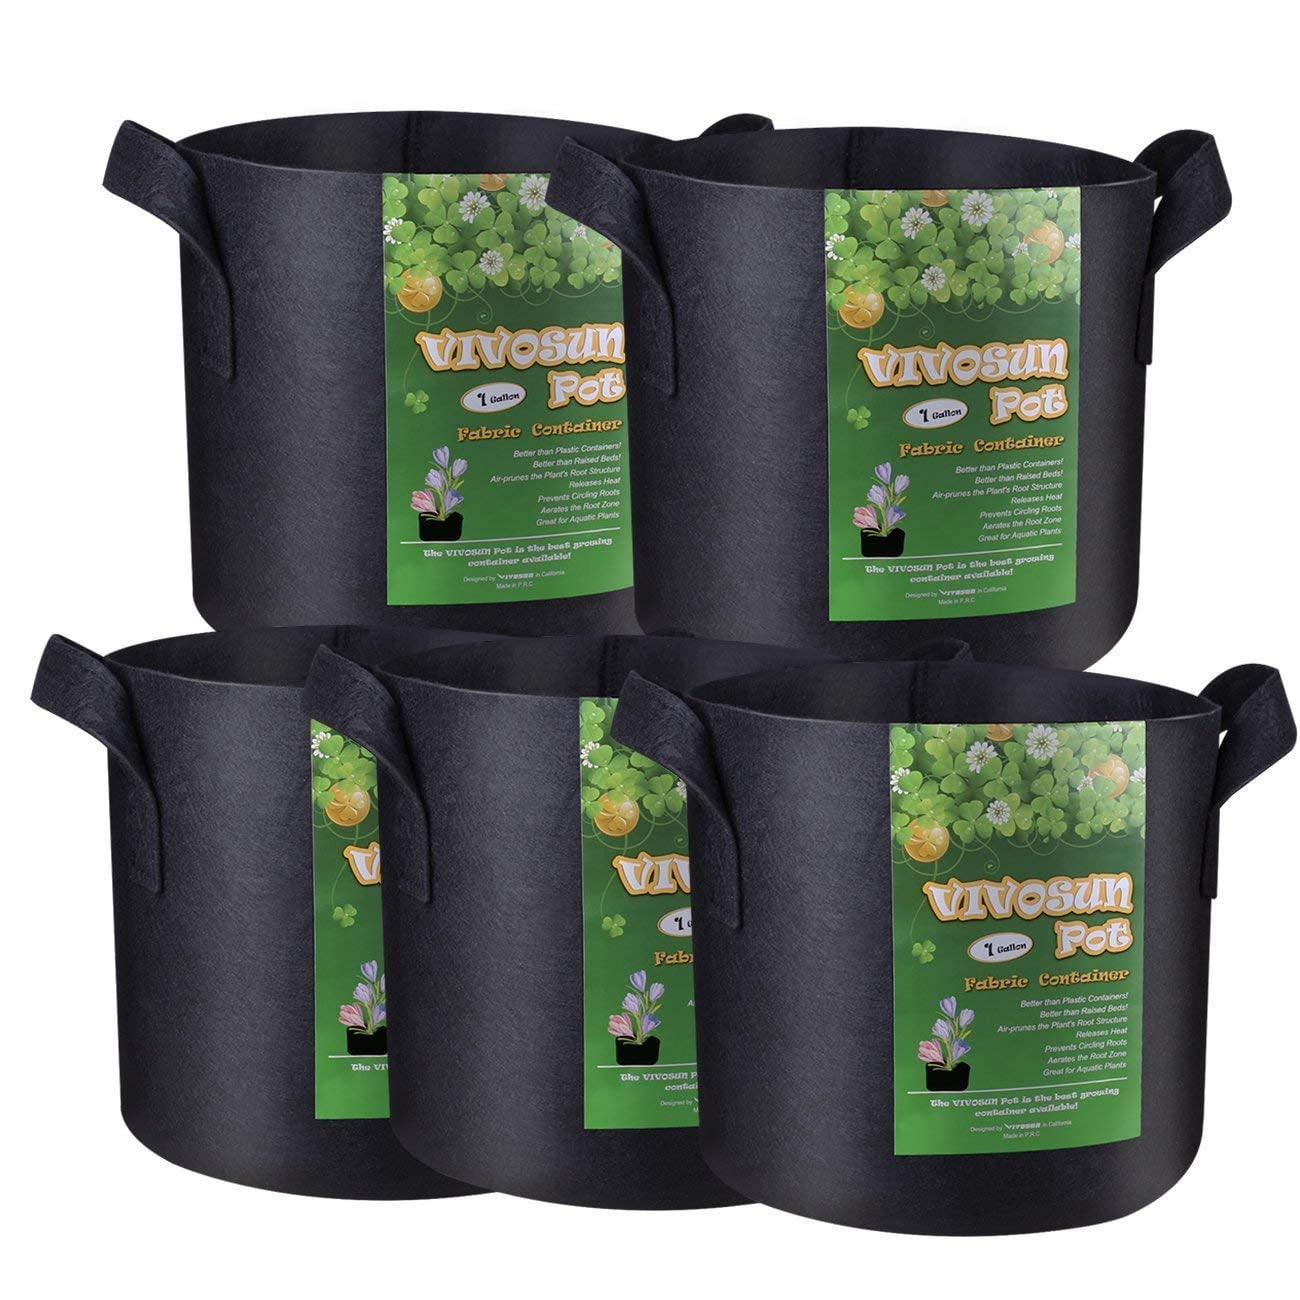 Square Grow Planter Bag Premium 7 Gallon 5 Pack Thickened Fabric Pots Aeration Fabric Cube with X Stitching Reinforced Handles